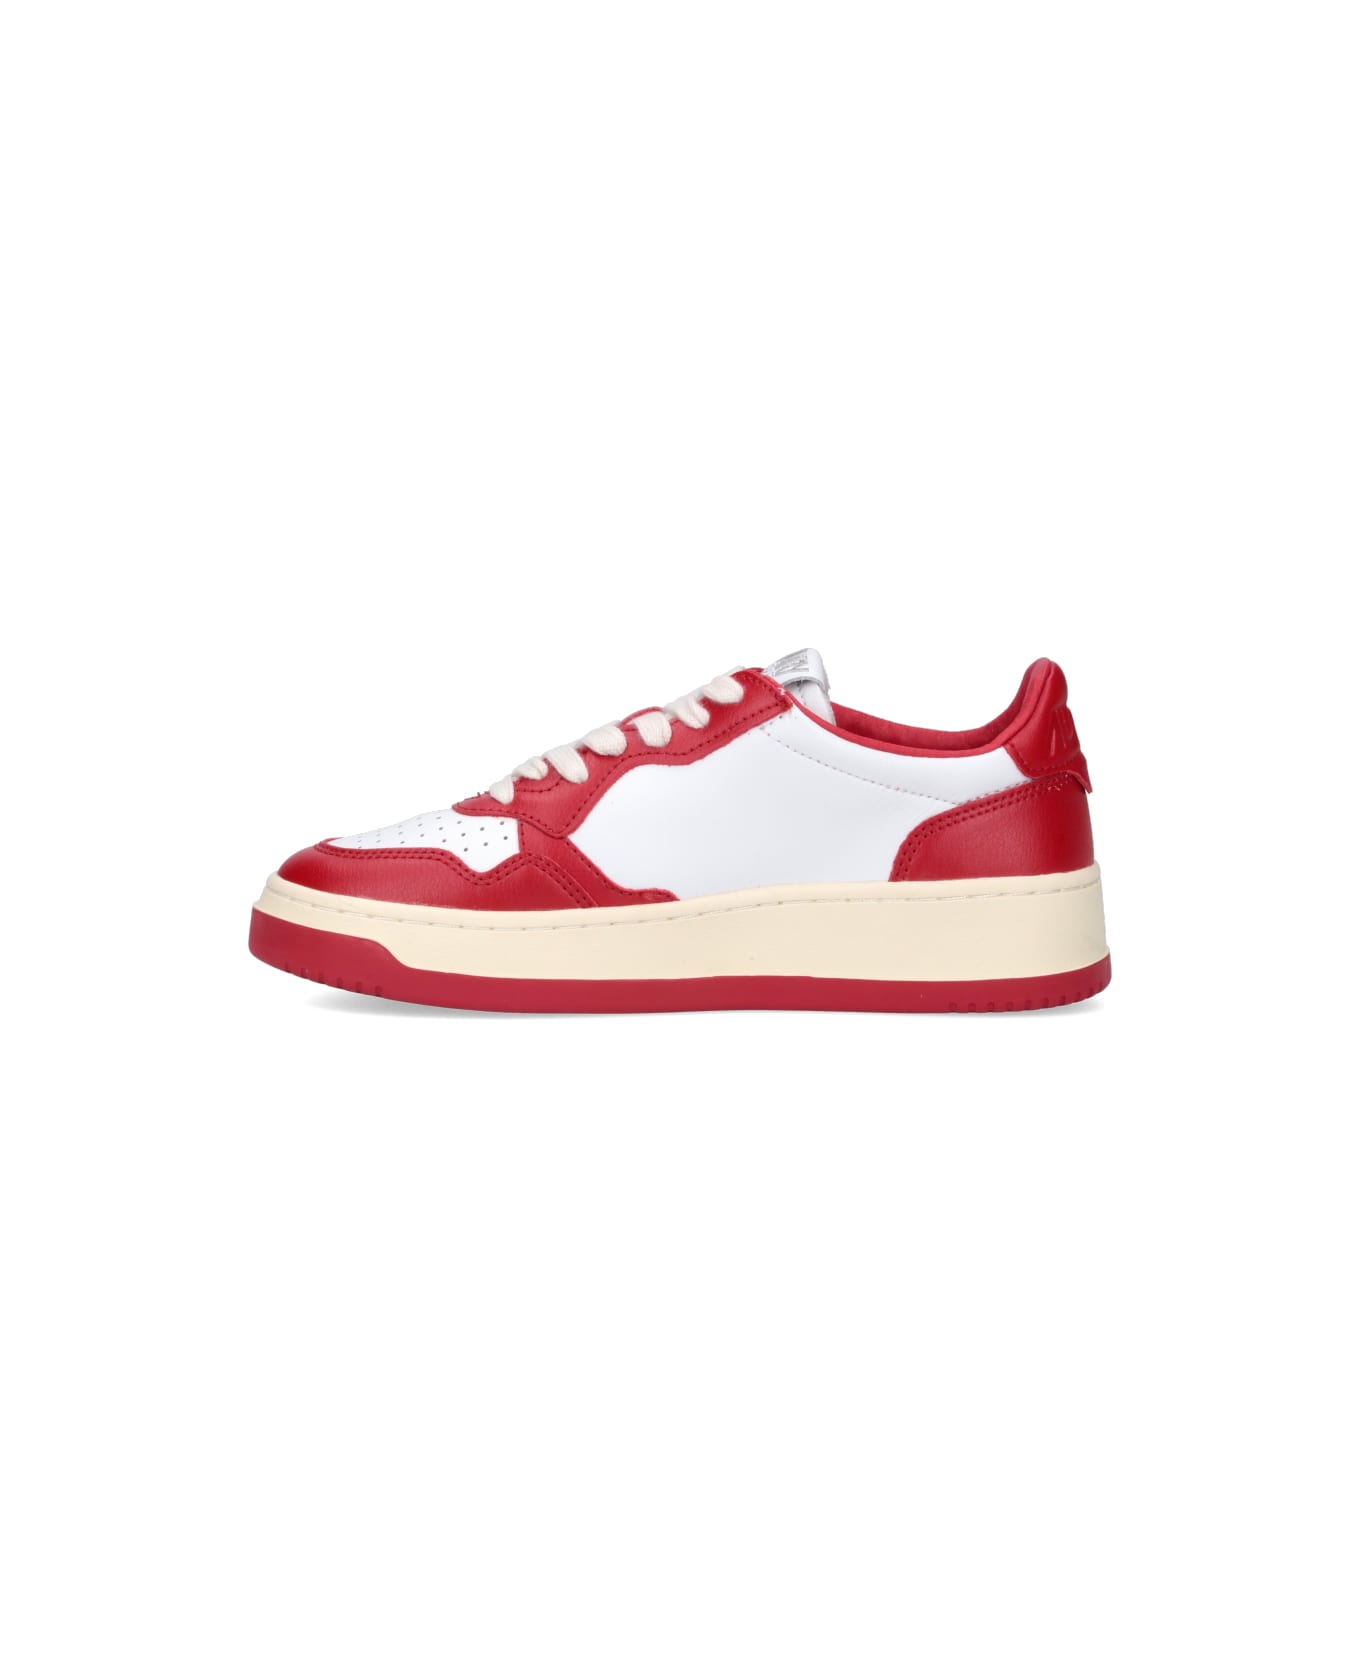 Autry Low Sneakers "medalist" - Red スニーカー